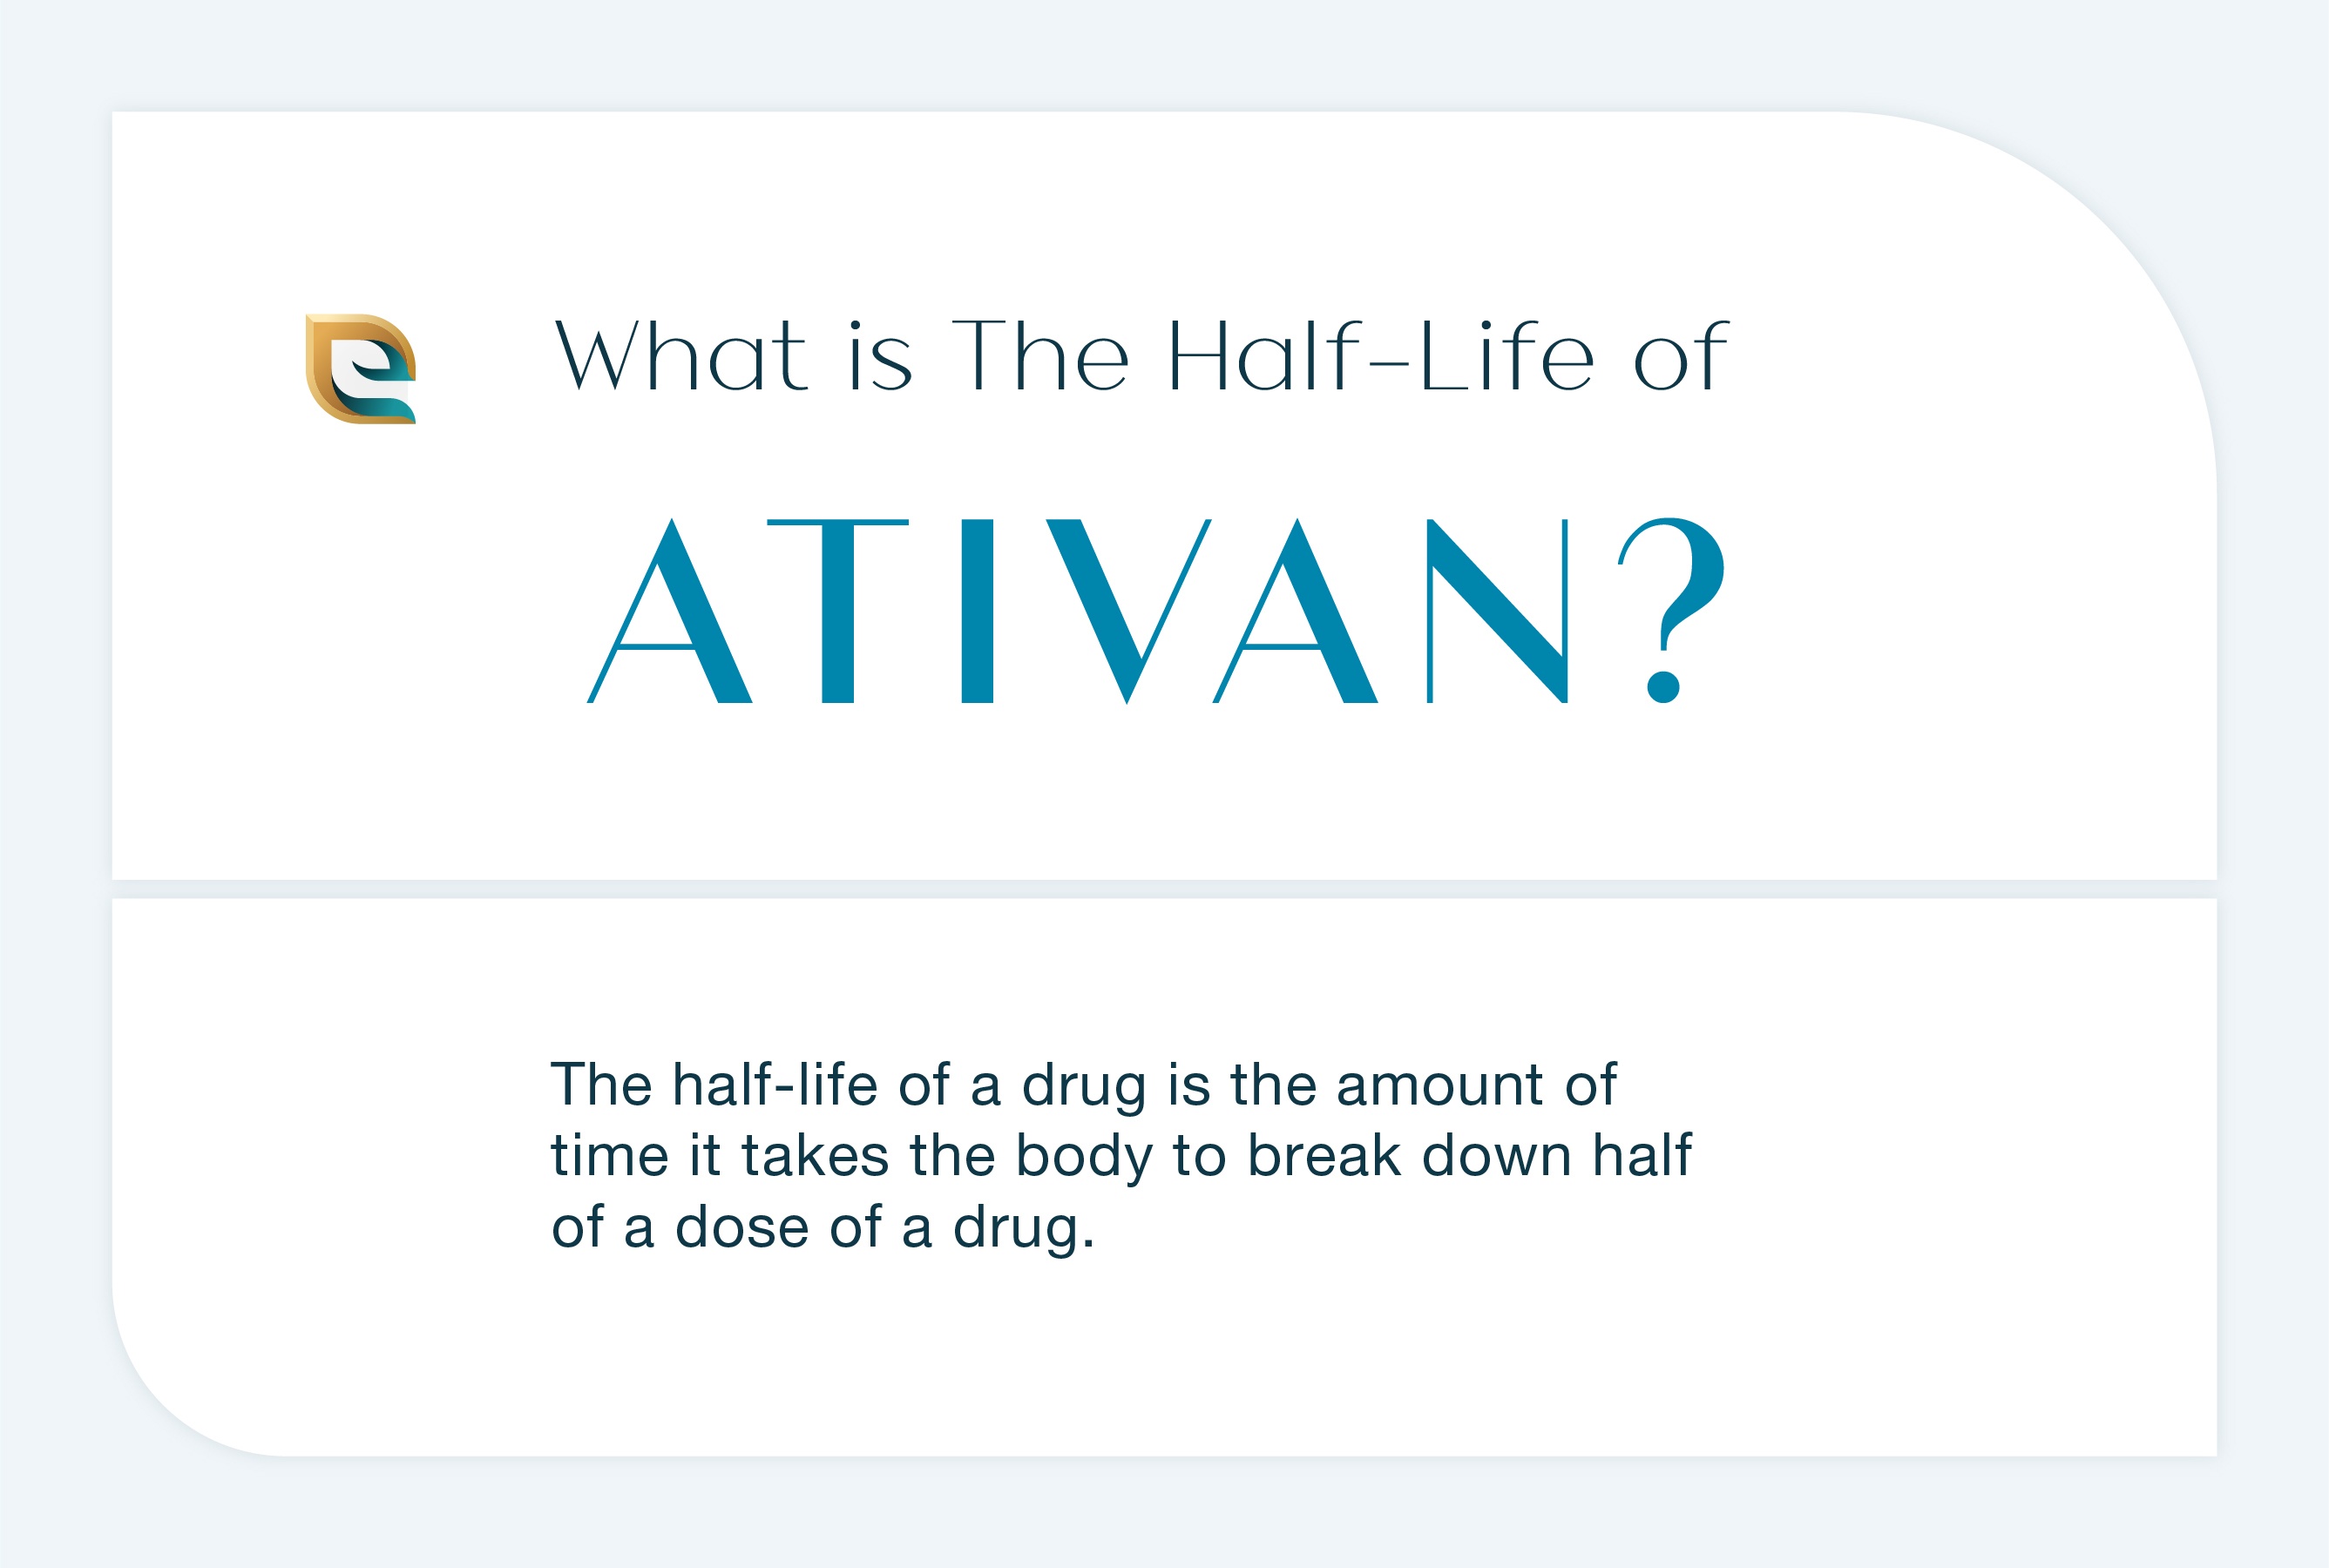 What is the half life of Ativan? This image describes the half life of Ativan